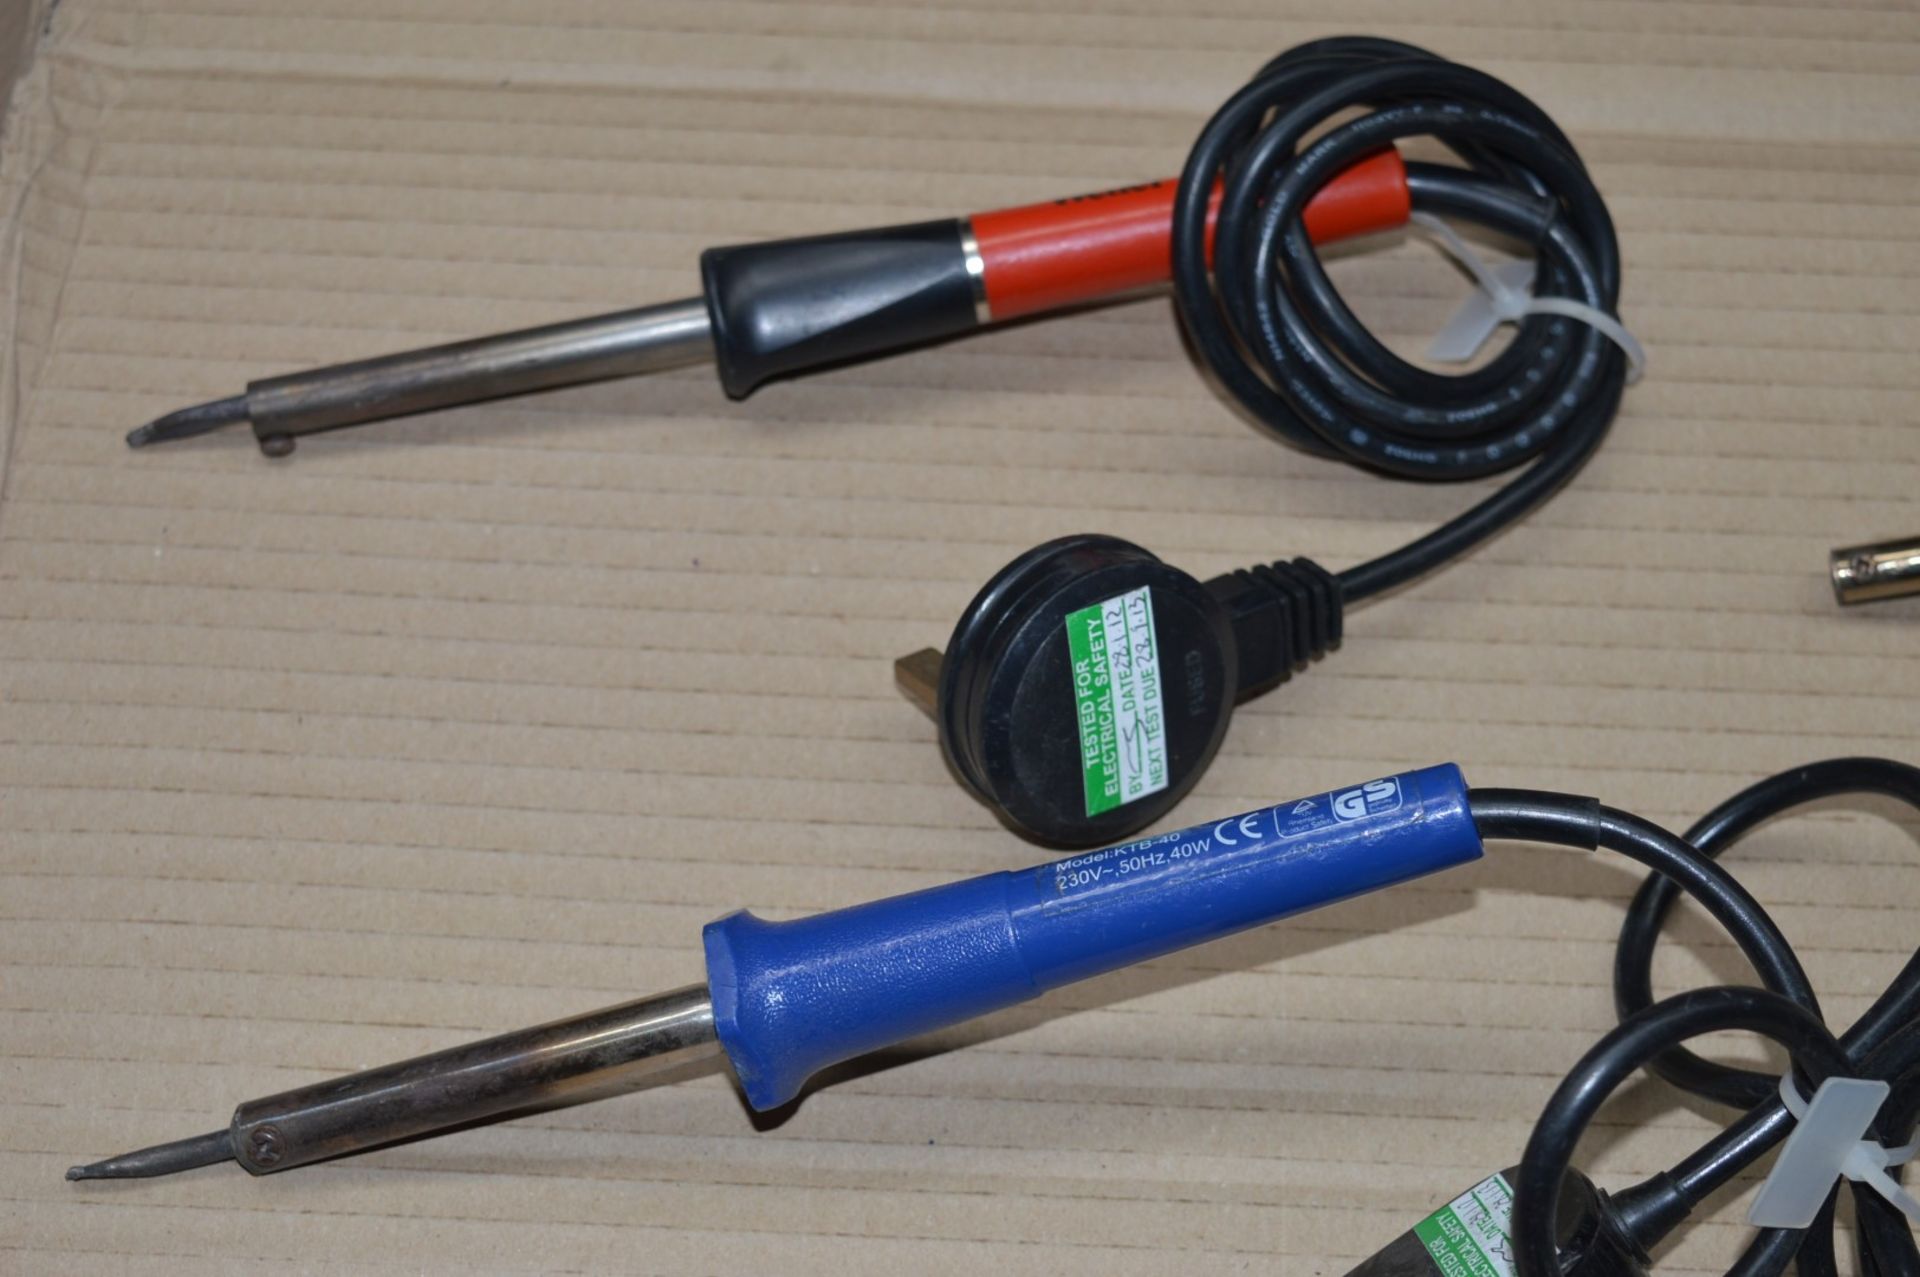 6 x Various 240v Soldering Irons - Brands Include Weller and Draper - CL300 - Ref JP105 - - Image 8 of 22